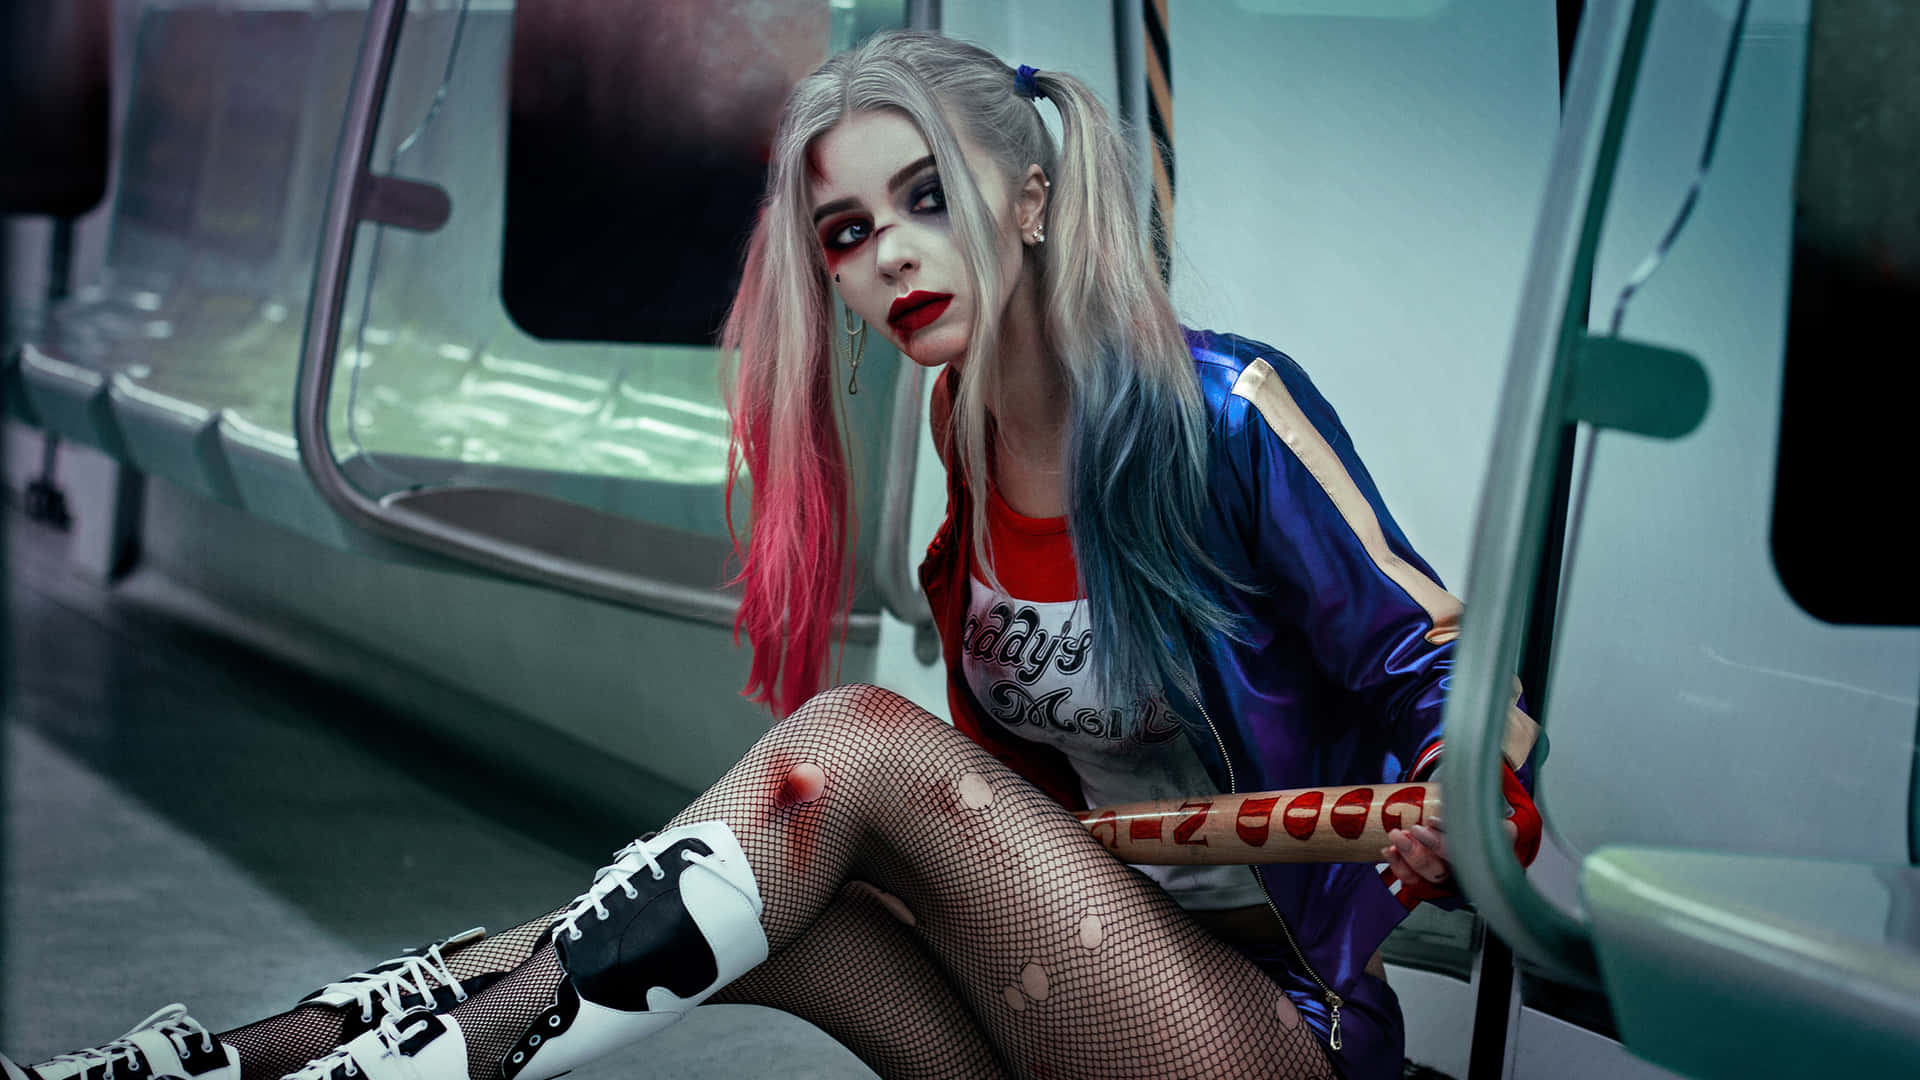 Stunning Harley Quinn Cosplay with Iconic Red and Blue Costume Wallpaper